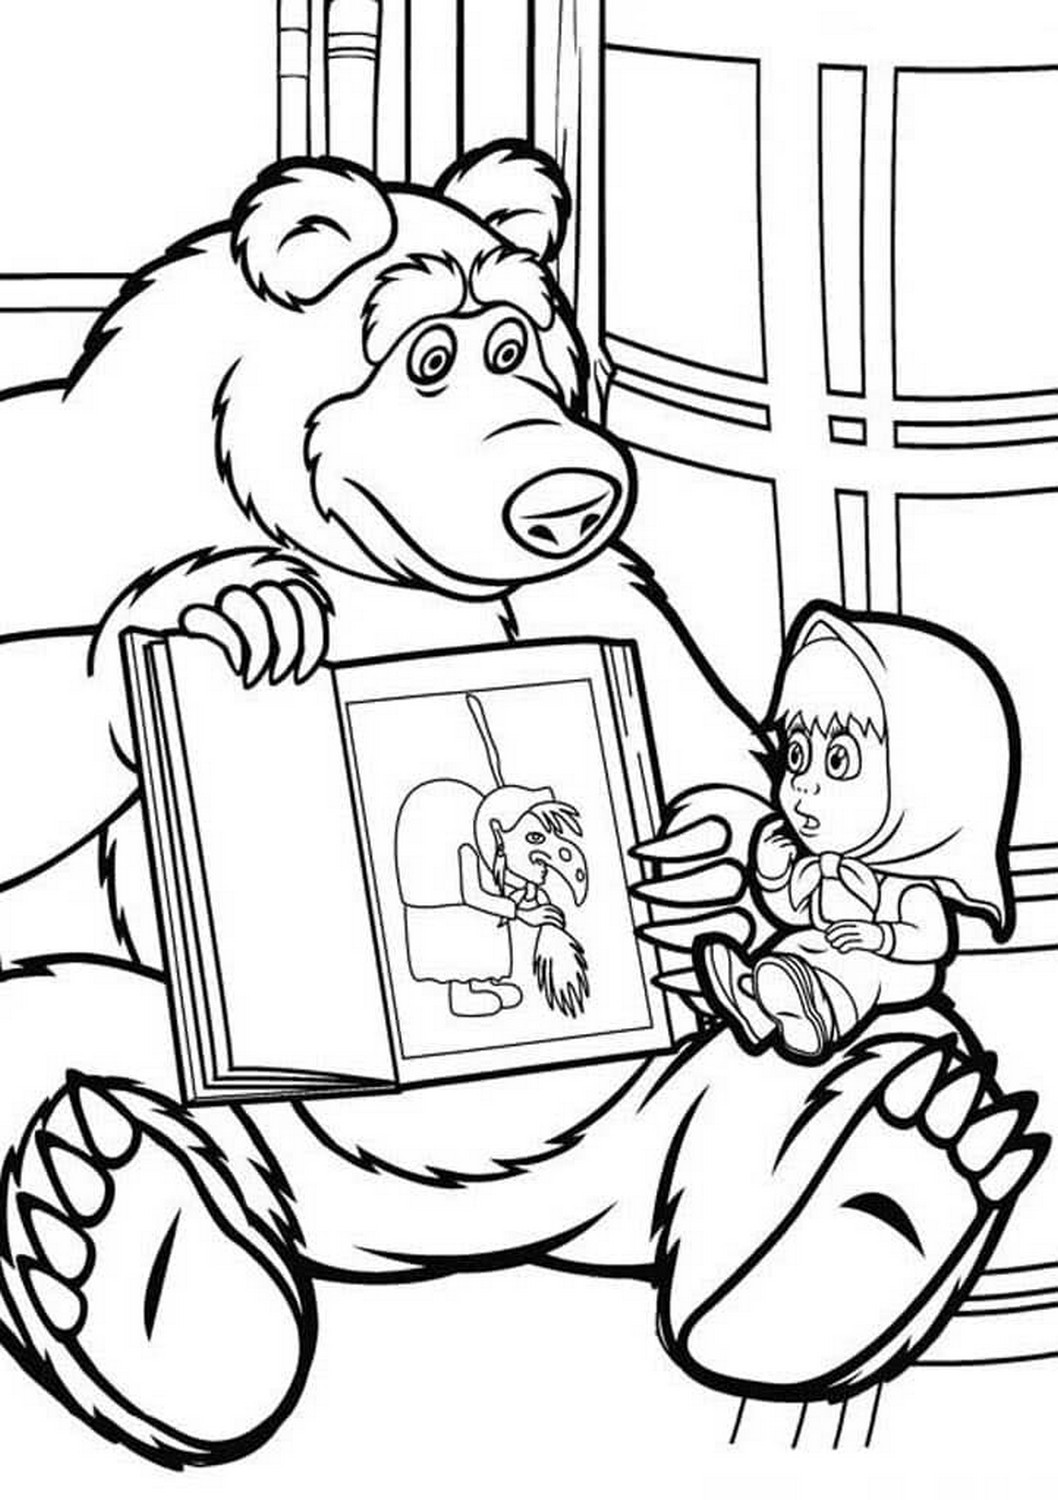 Masha and the Bear 81 drawing from Masha and the Bear to print and color